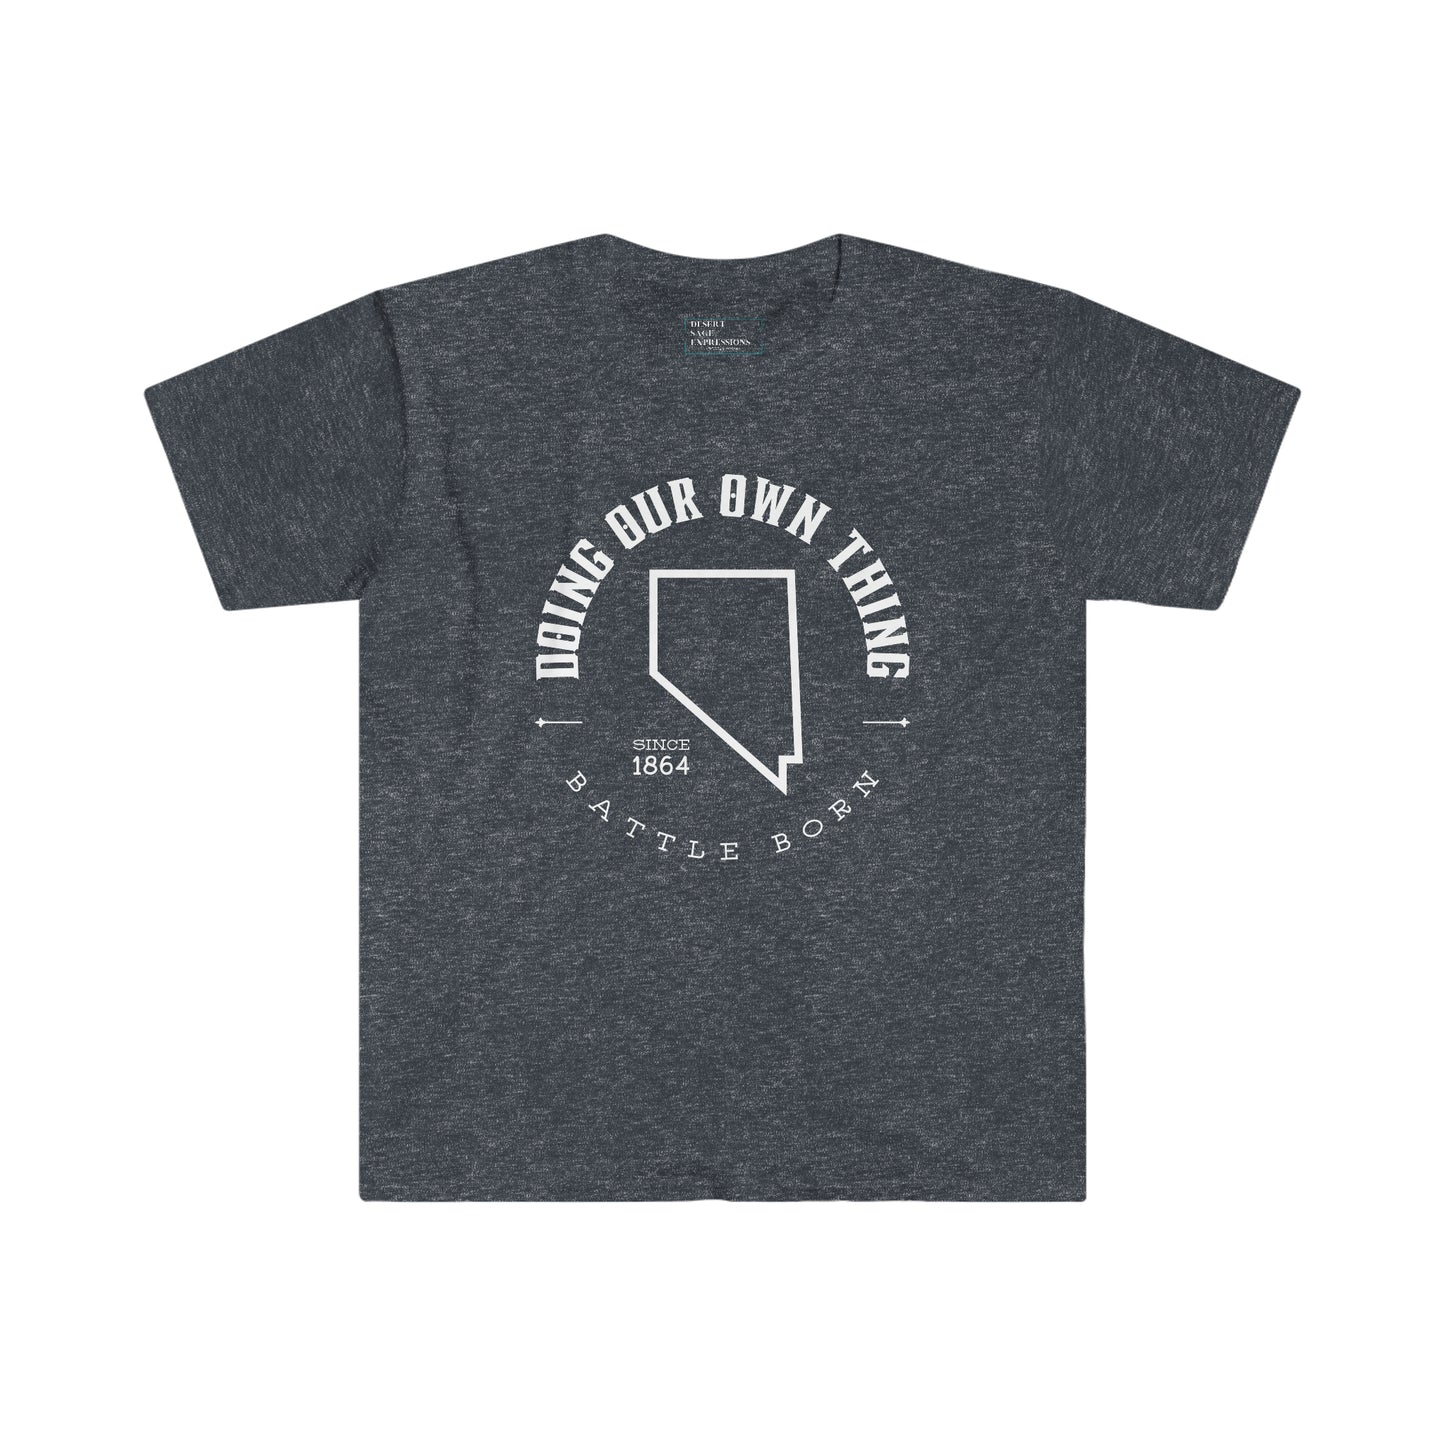 Doing our own thing | Nevada Pride | Graphic Tee | Battle Born | Home Means Nevada